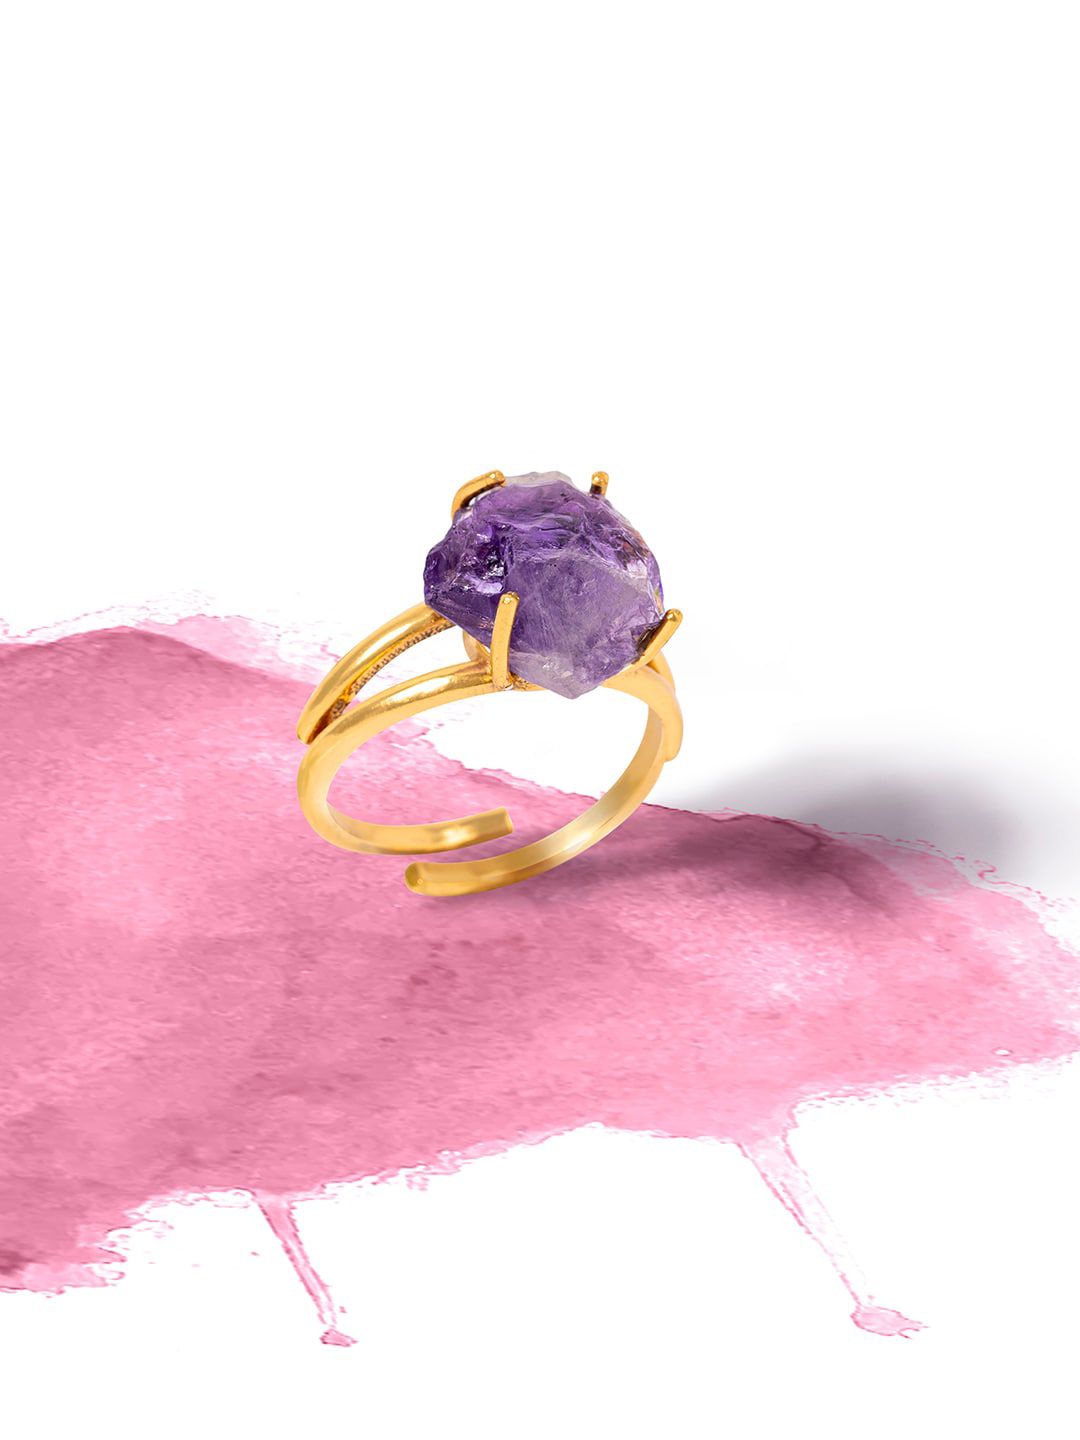 Mikoto by FableStreet Gold-Plated Purple Amethyst Crystal Studded Adjustable Finger Ring Price in India